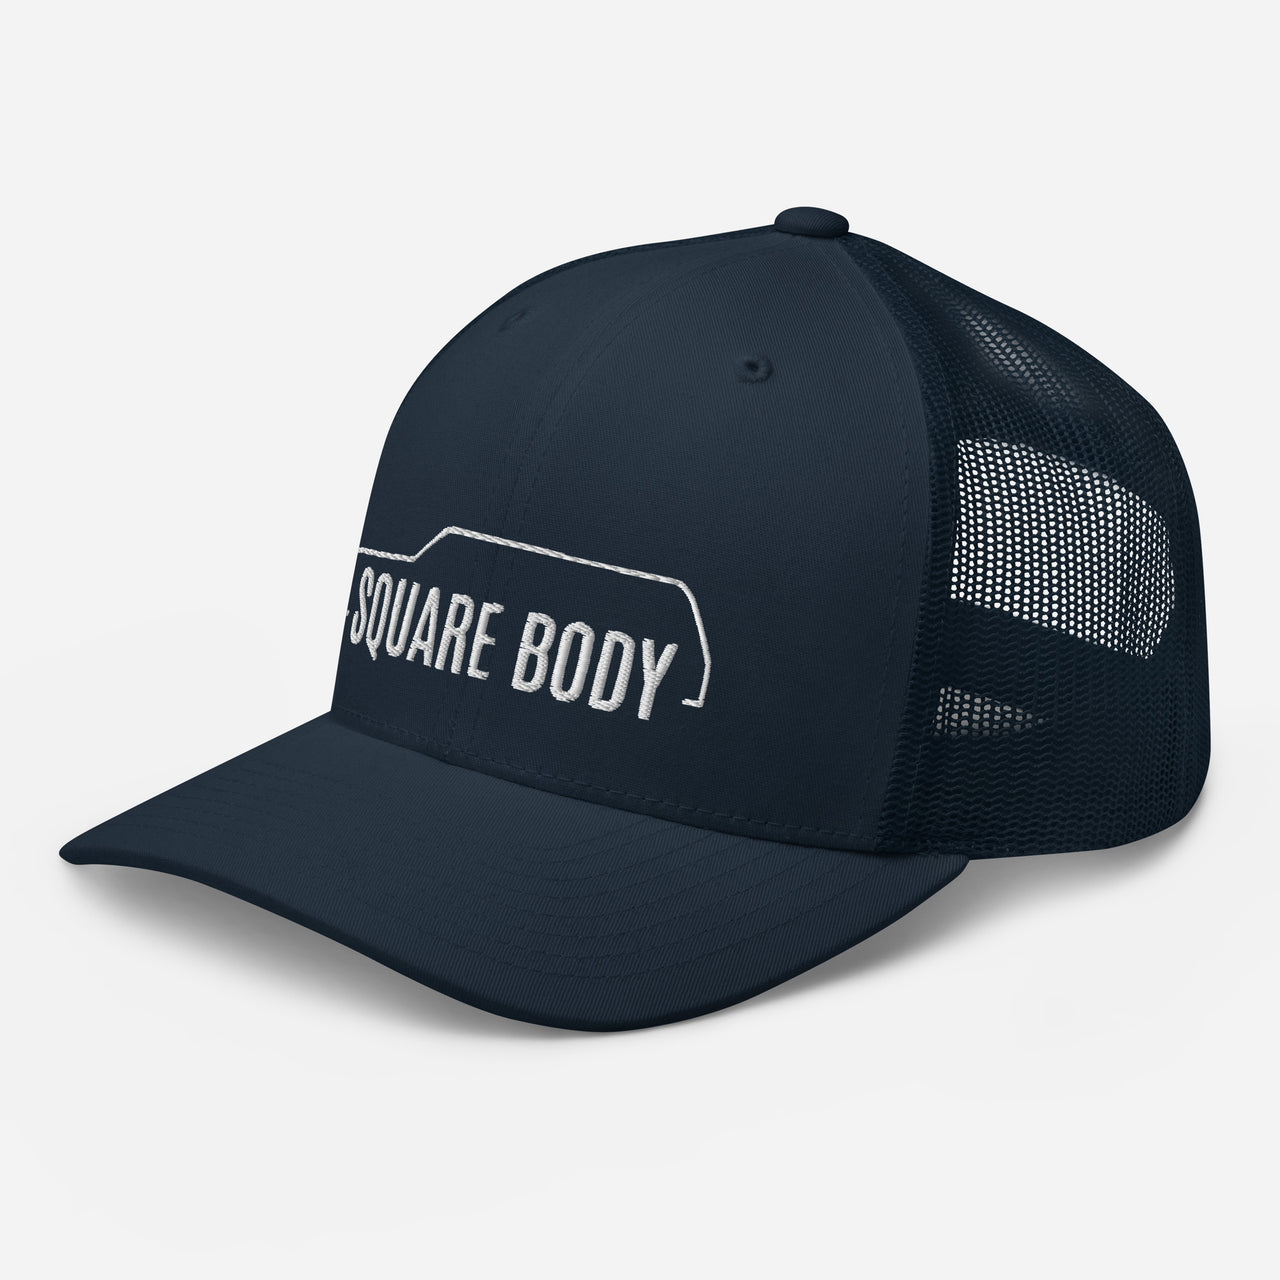 3/4 view of a square body suburban trucker hat from aggressive thread in navy